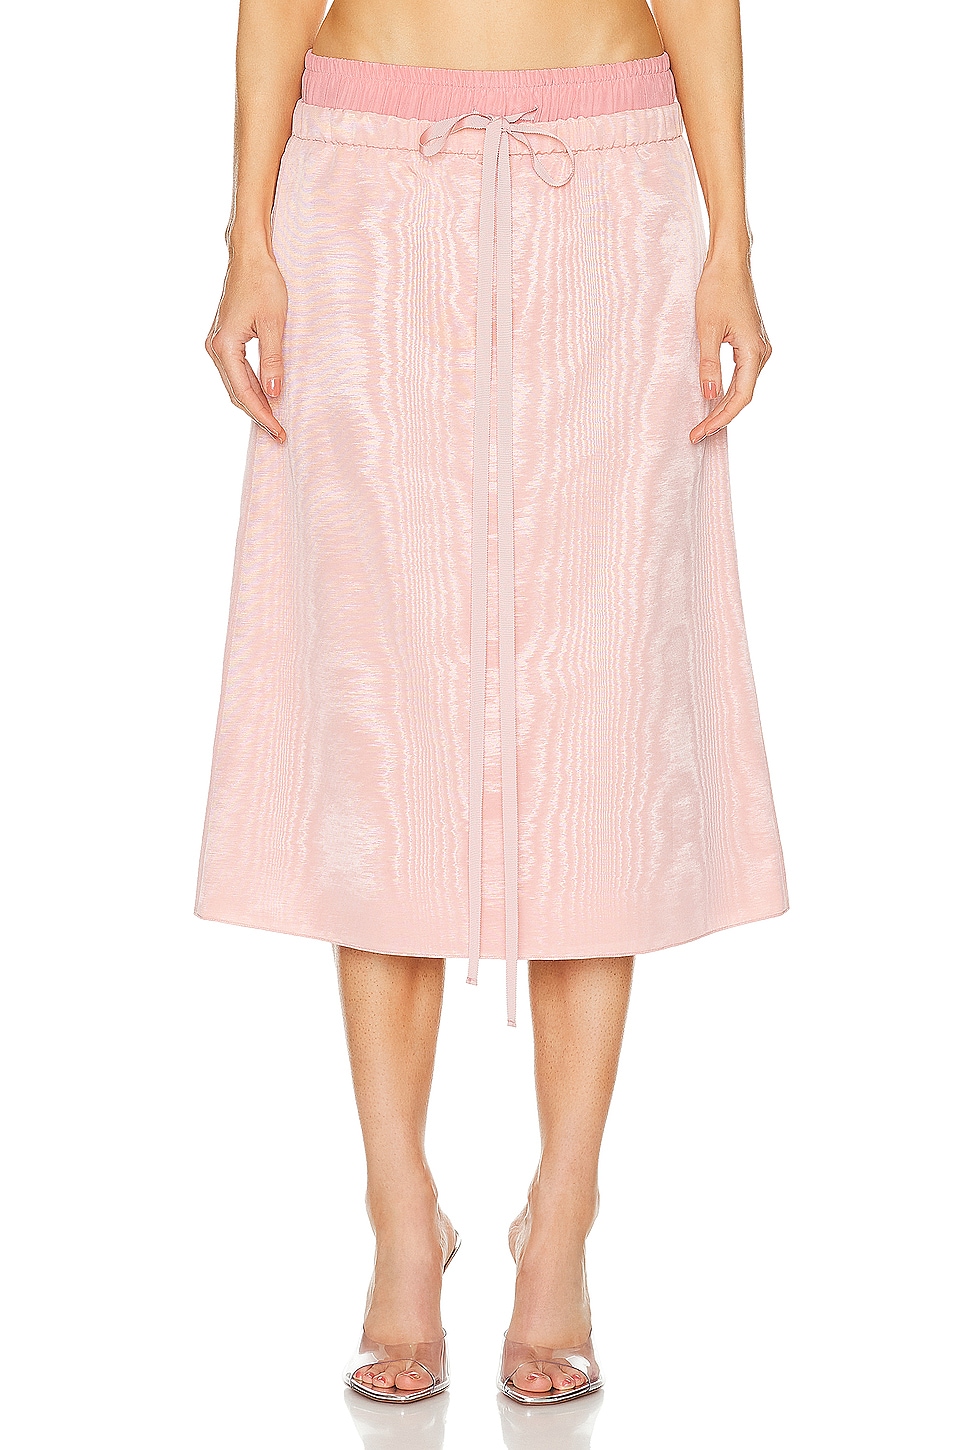 Image 1 of Wiederhoeft A-line Boxing Skirt in Blush